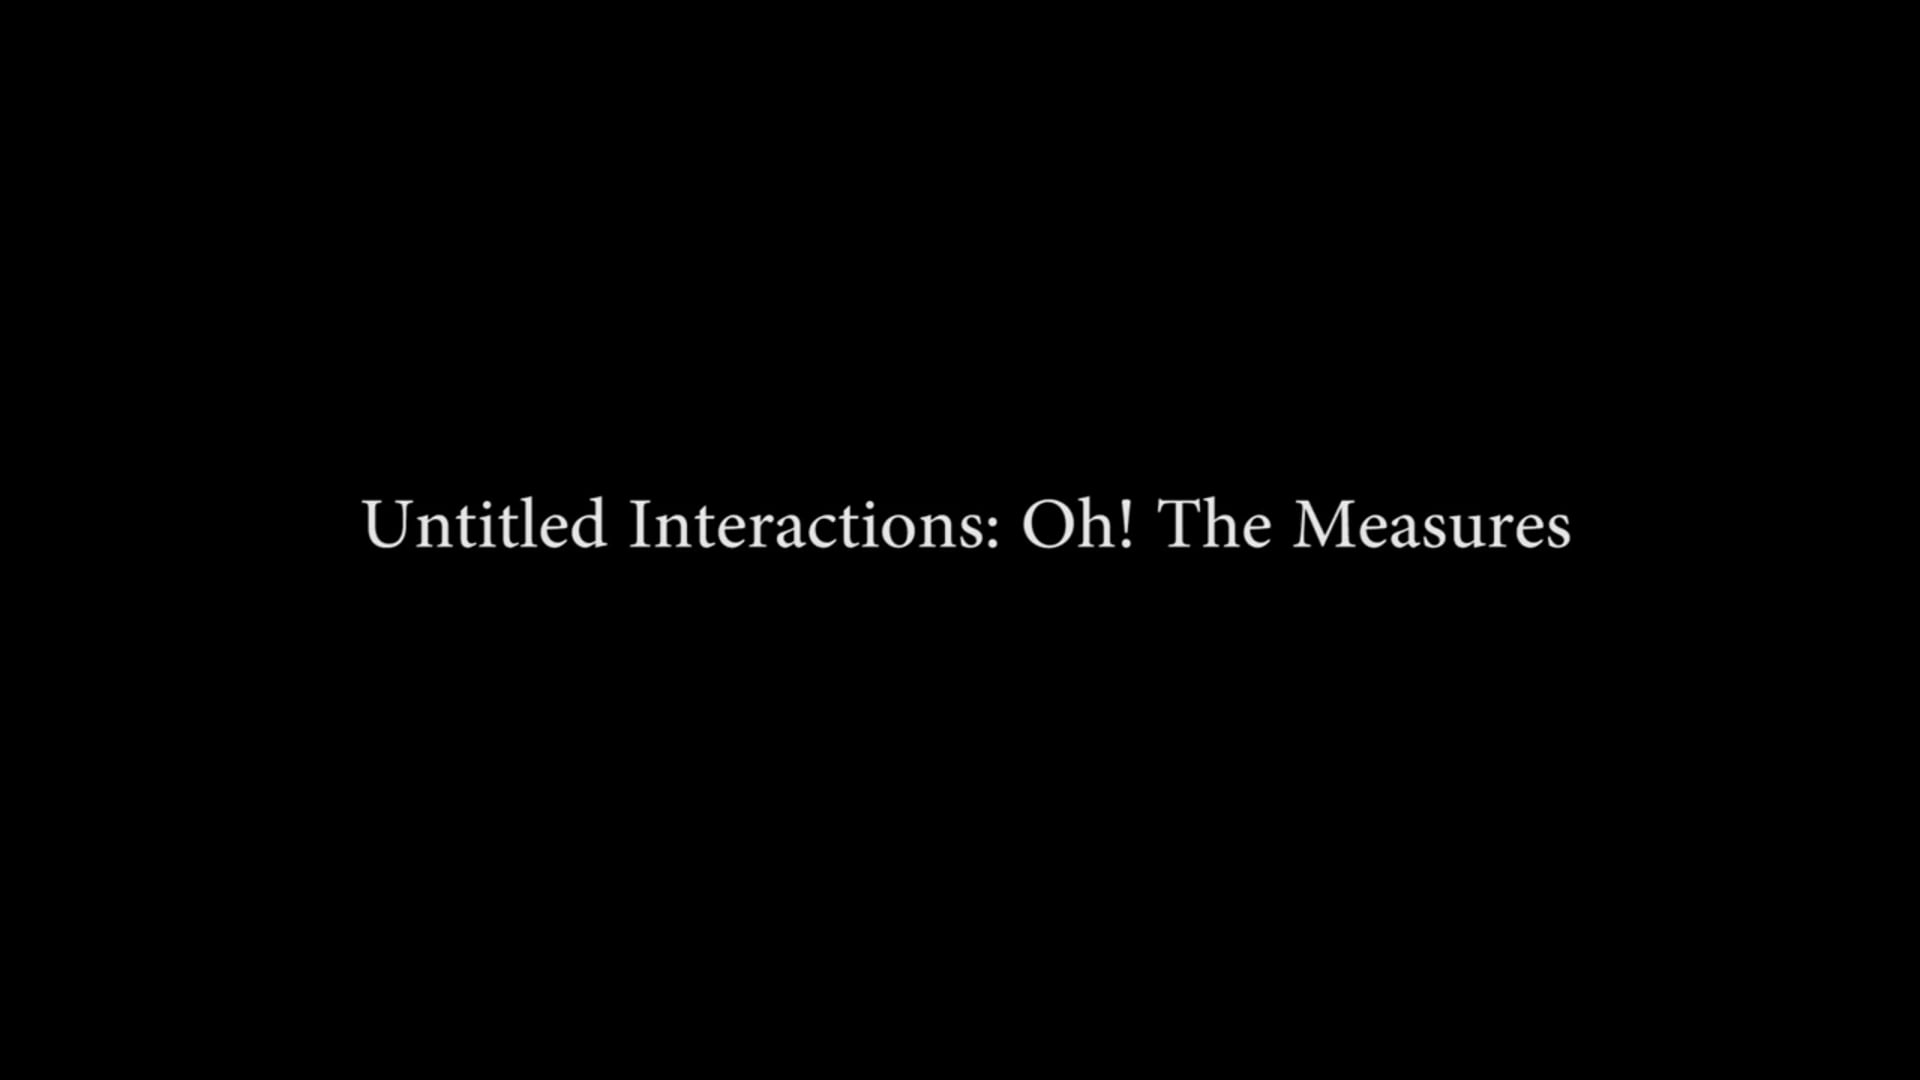 Untitled Interactions - Oh! The Measures